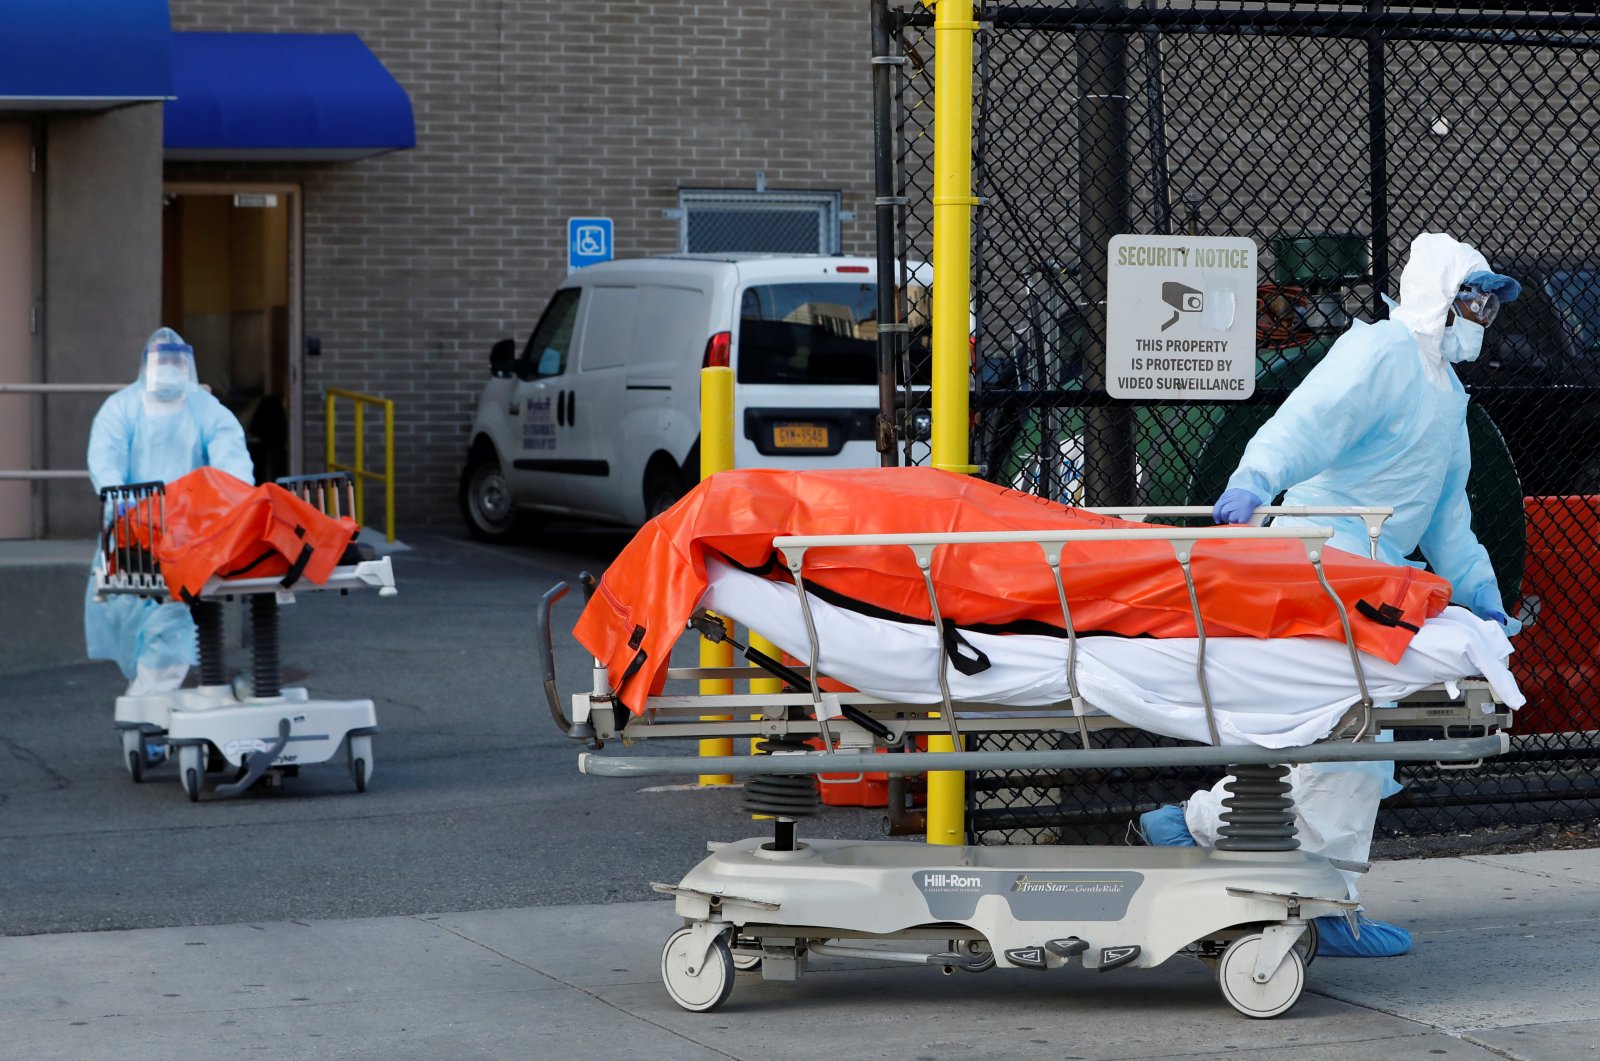 Health care workers wheel the bodies of deceased people from the Wyckoff Heights Medical Center during the outbreak of the coronavirus in the Brooklyn borough of New York City, New York, U.S., Saturday, April 4, 2020. (Reuters Photo)